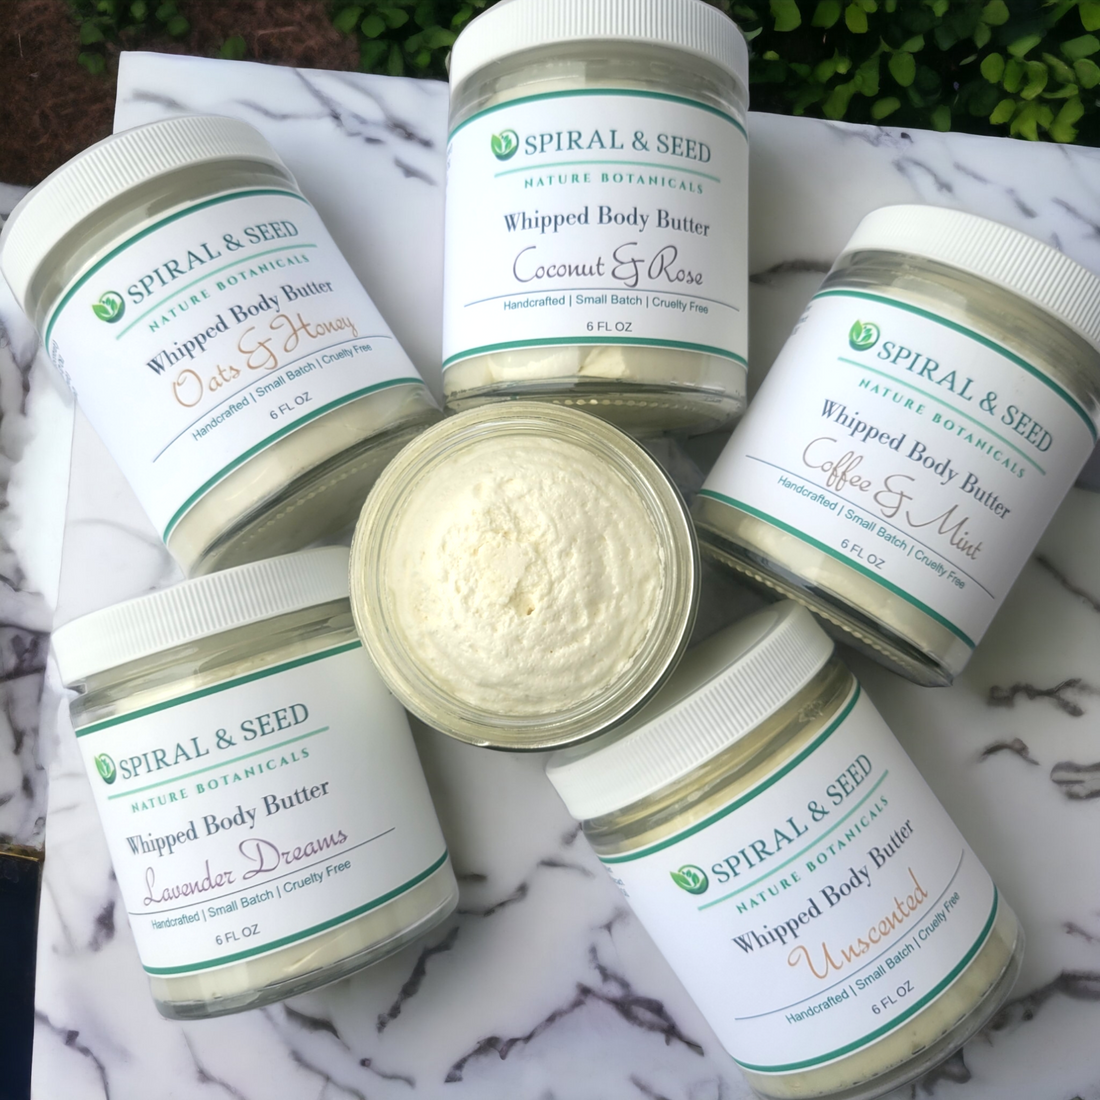 Benefits of Ethically Sourced Shea Butter – Spiral & Seed Nature Botanicals